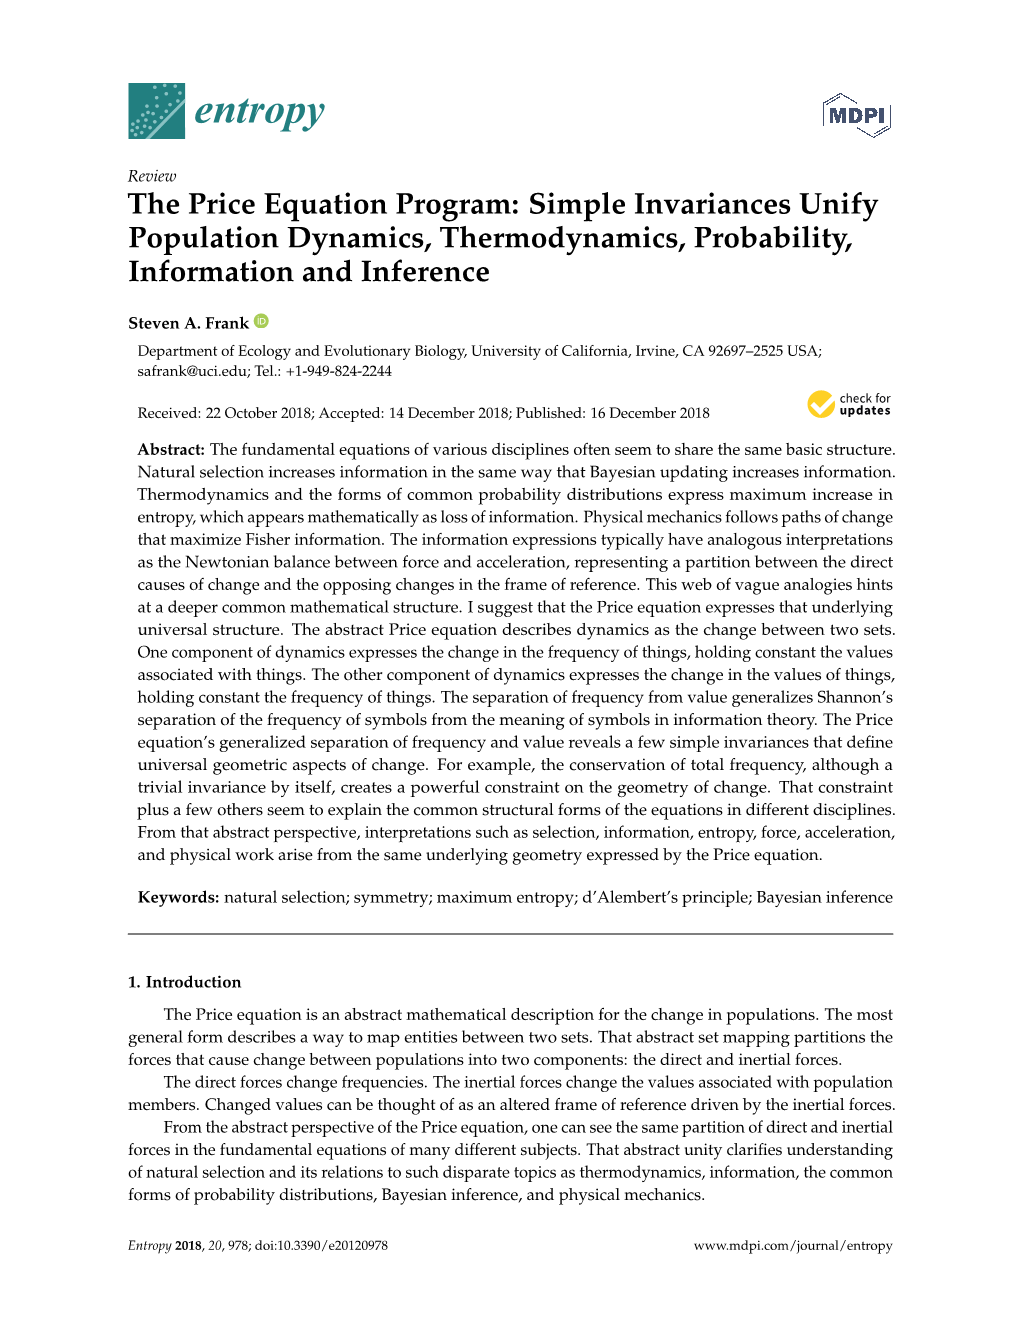 The Price Equation Program: Simple Invariances Unify Population Dynamics, Thermodynamics, Probability, Information and Inference